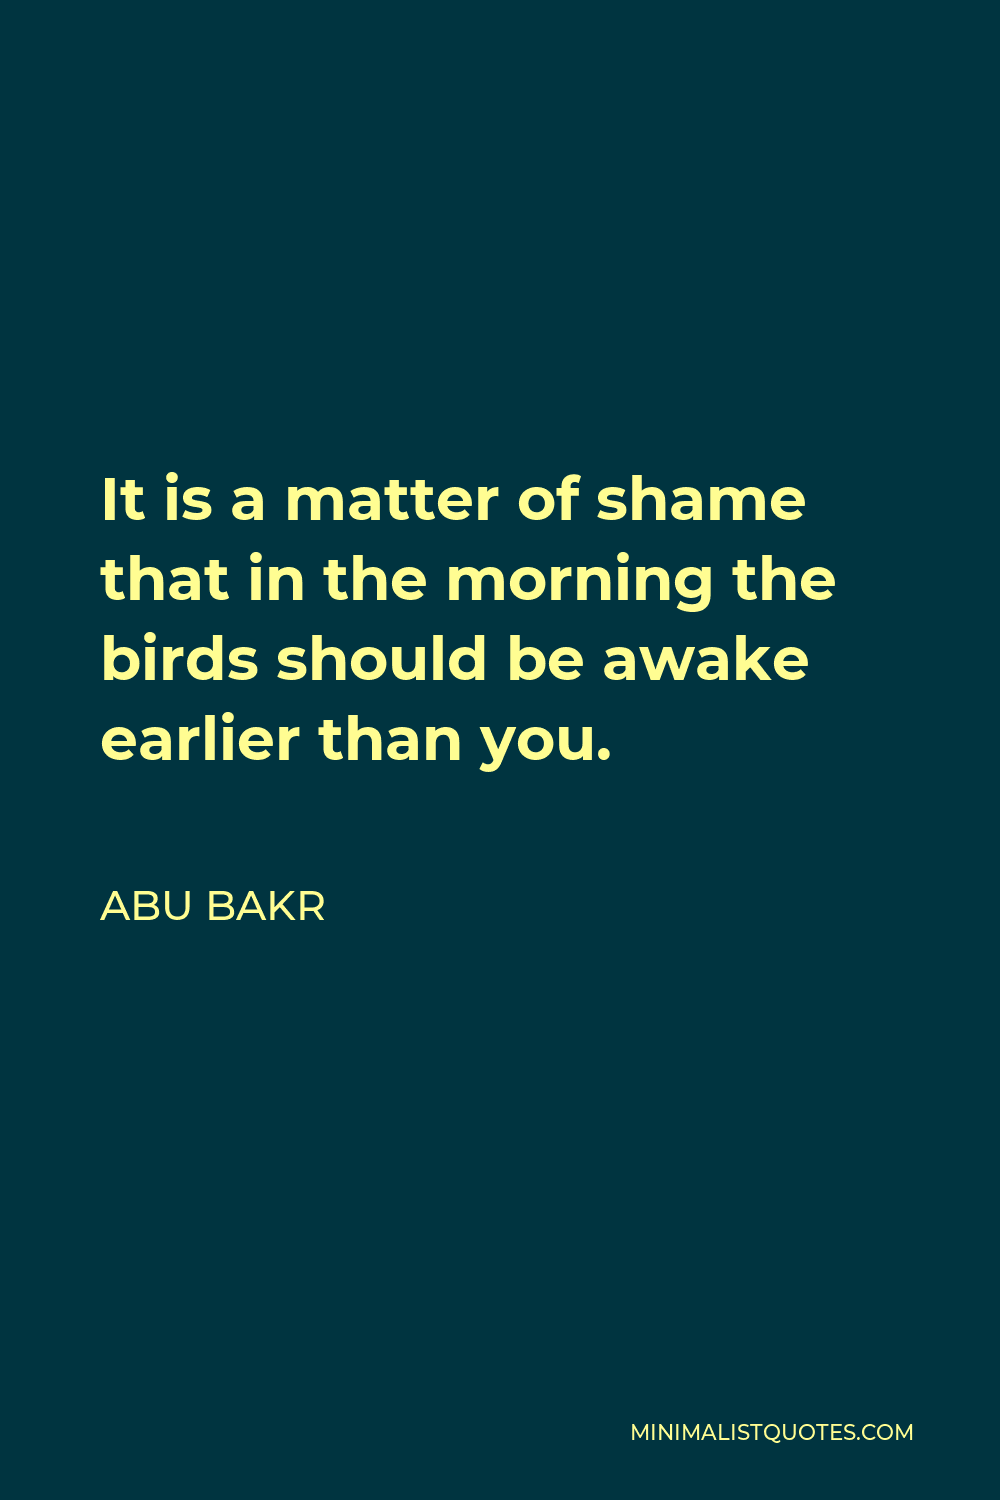 Abu Bakr Quote: It is a matter of shame that in the morning the birds ...